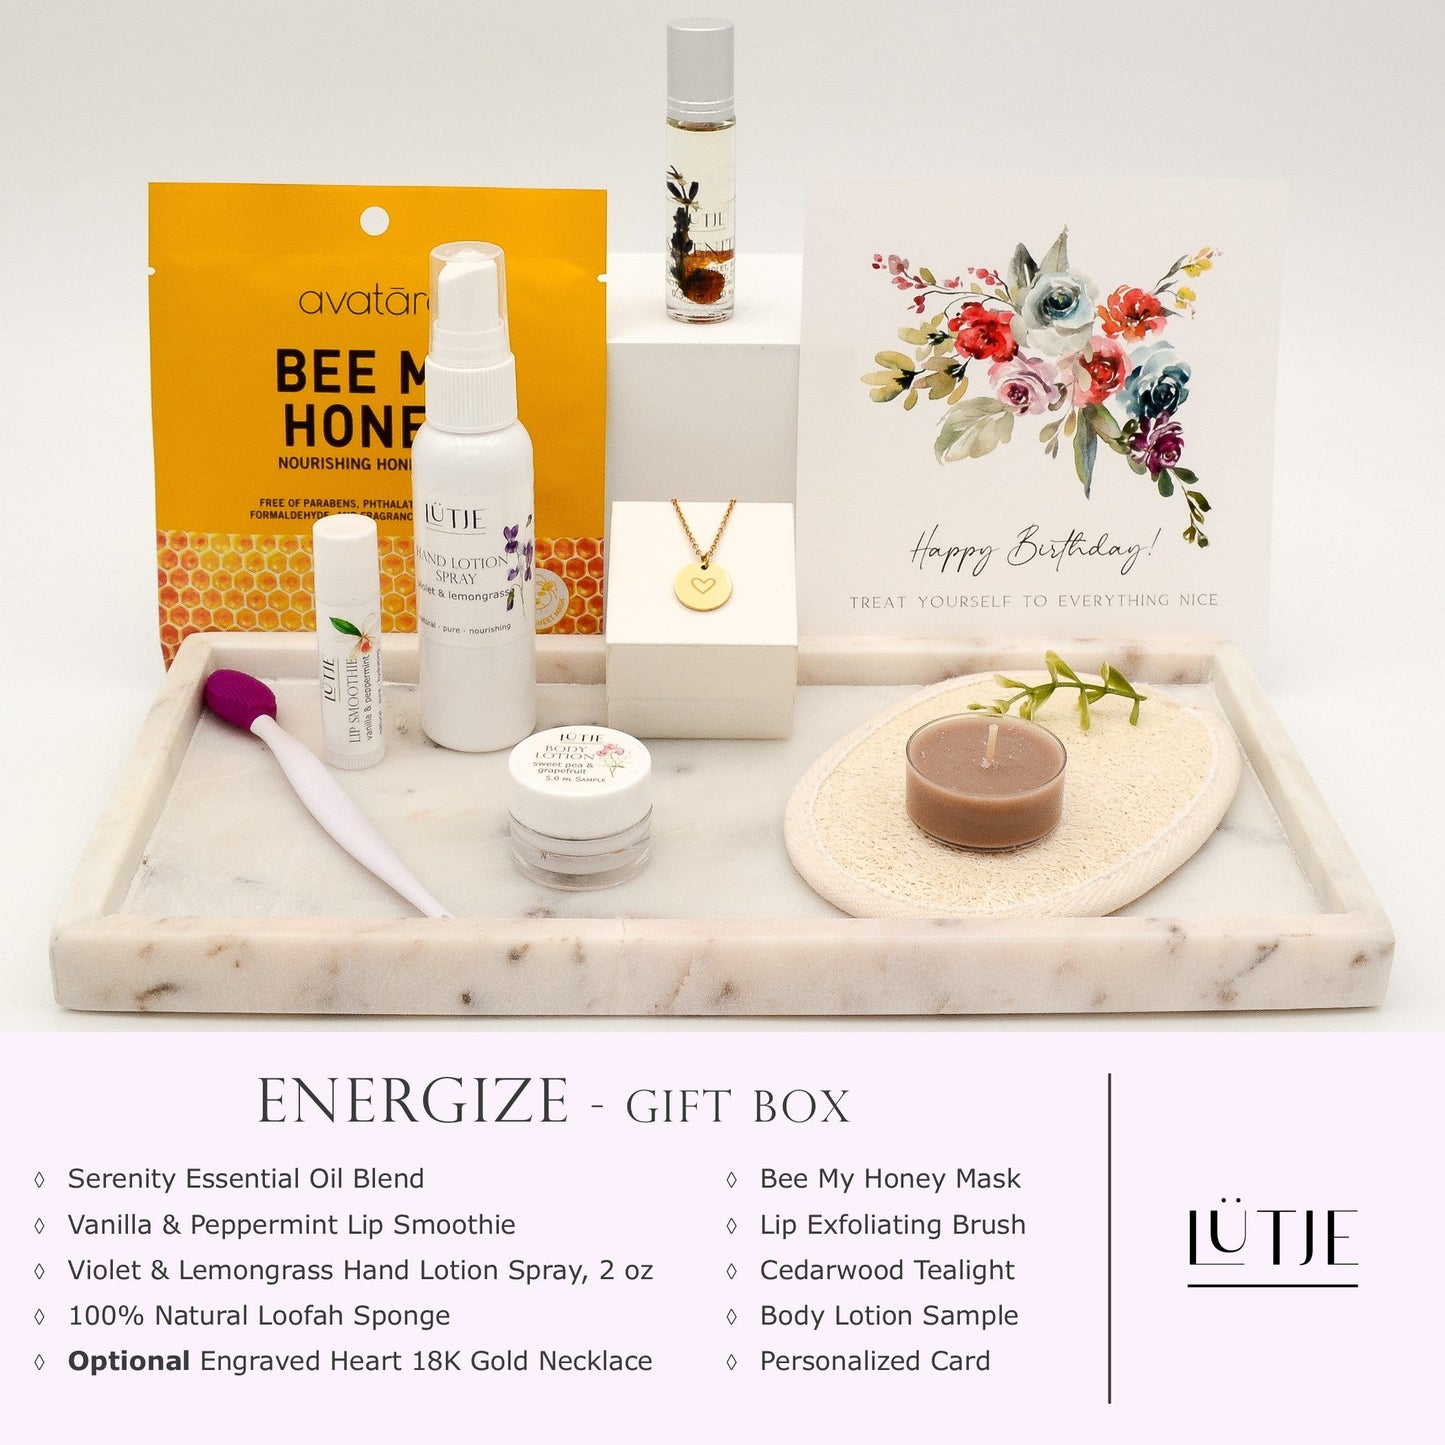 Energize Gift Box for women, BFF, wife, daughter, sister, mom, or grandma, includes Violet & Lemongrass hand lotion spray, essential oil, lip balm, hydrating face mask, other bath, spa and self-care items, and optional 18K gold-plated necklace with engraved heart.